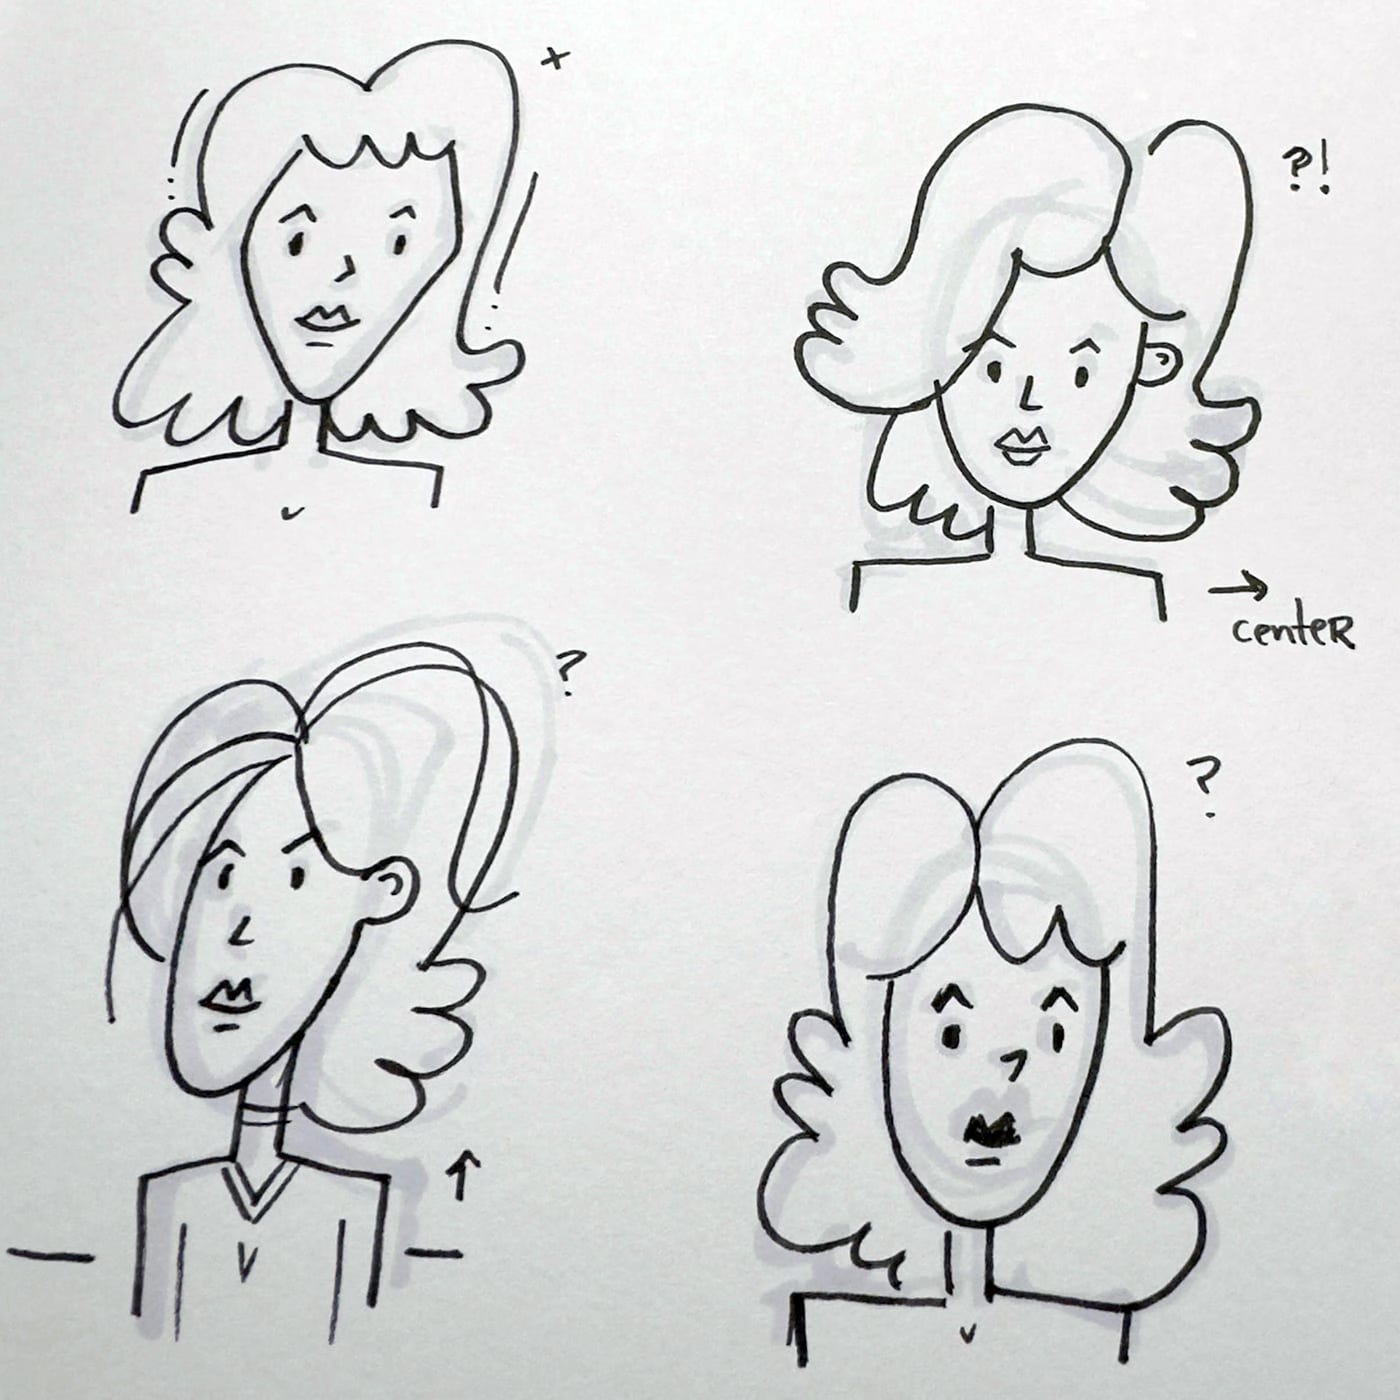 A sketchbook page with marker drawings of a lady.